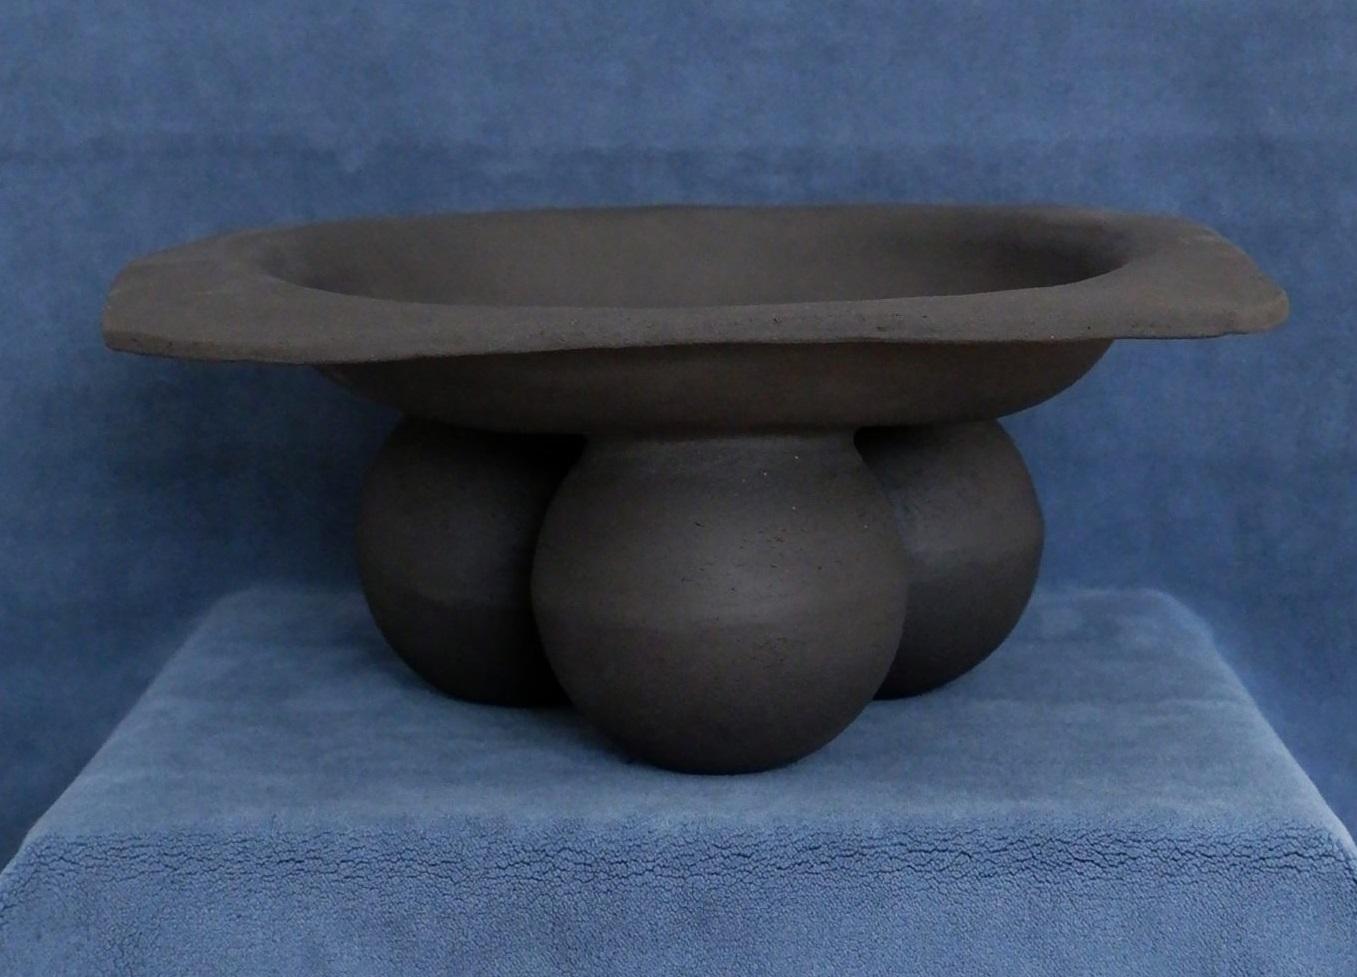 Samaia Fruit Bowl by Ia Kutateladze
One Of  A Kind.
Dimensions: D 29 x W 27 x H 12 cm.
Materials: Raw clay.

Hand-built one of a kind, bold sculptural tableware piece, which could be used as a fruit bowl or platter. The irregular shapes are always